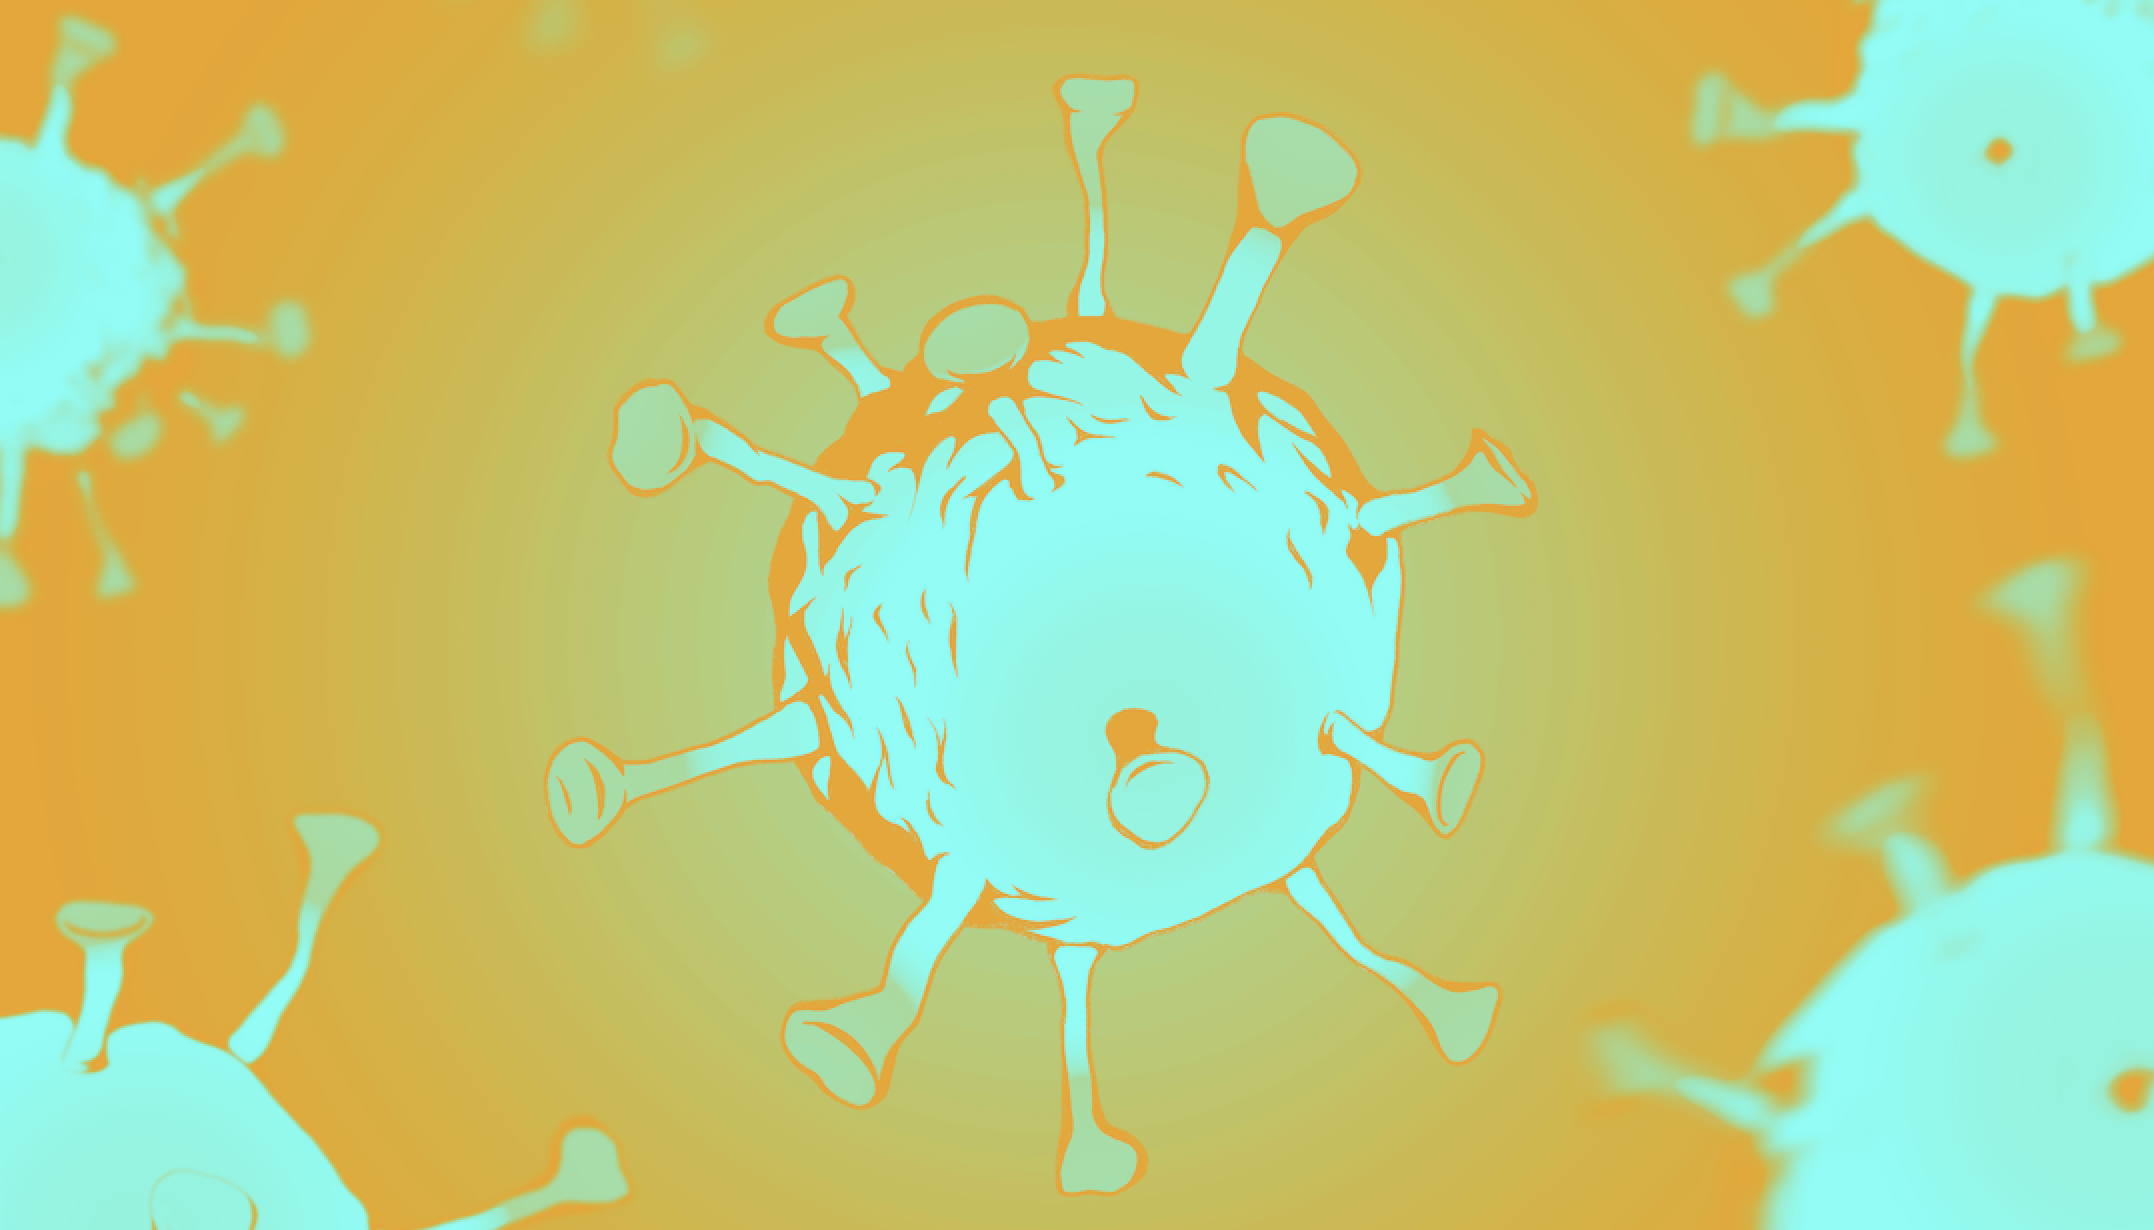 A SARS-CoV-2 virus, depicted in neon blue against a mustard yellow background